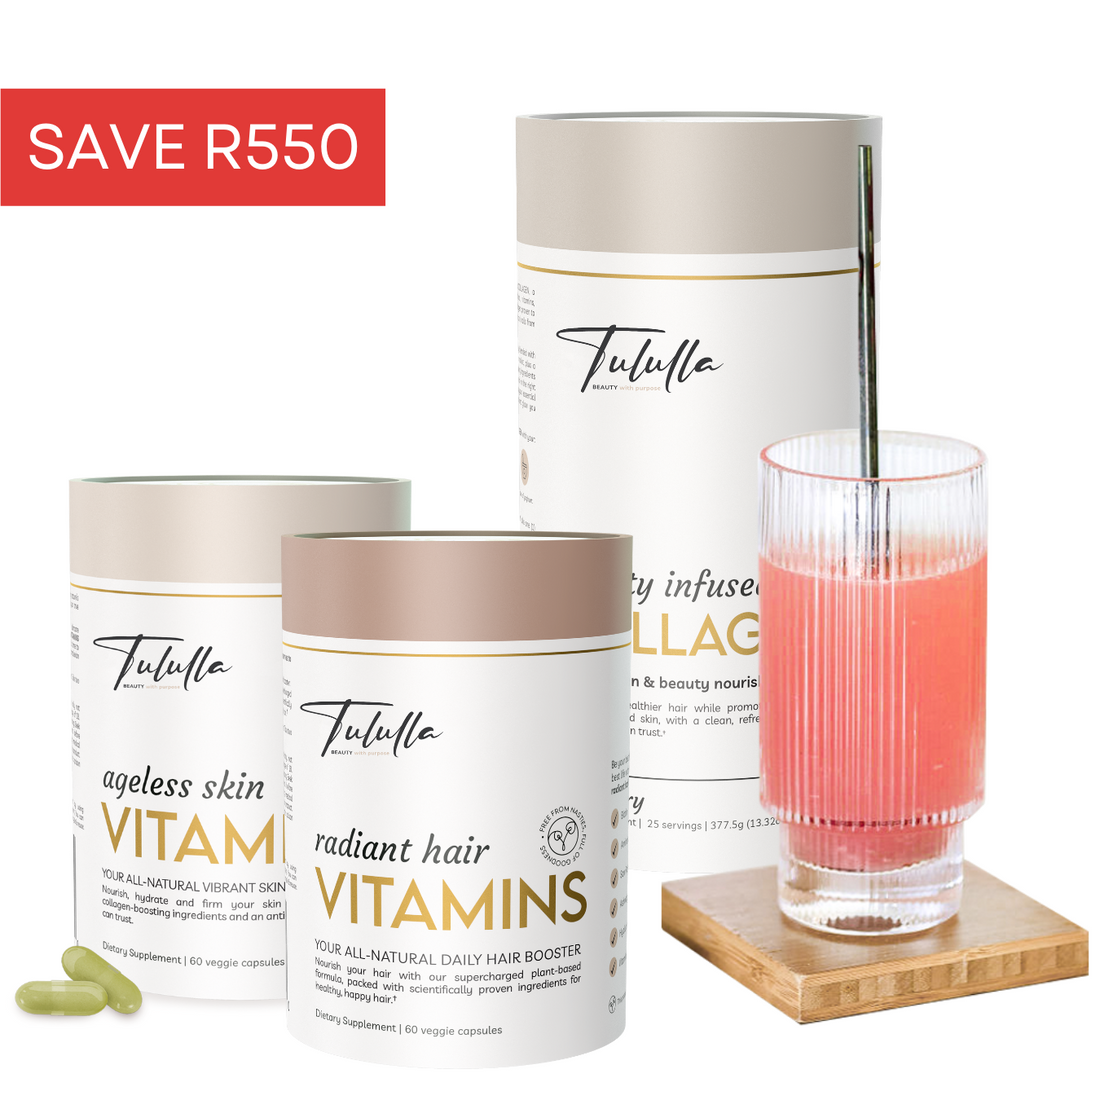 1 x Ageless Skin VITAMINS + 1 x Radiant Hair VITAMINS + 1 x Beauty Infused Collagen